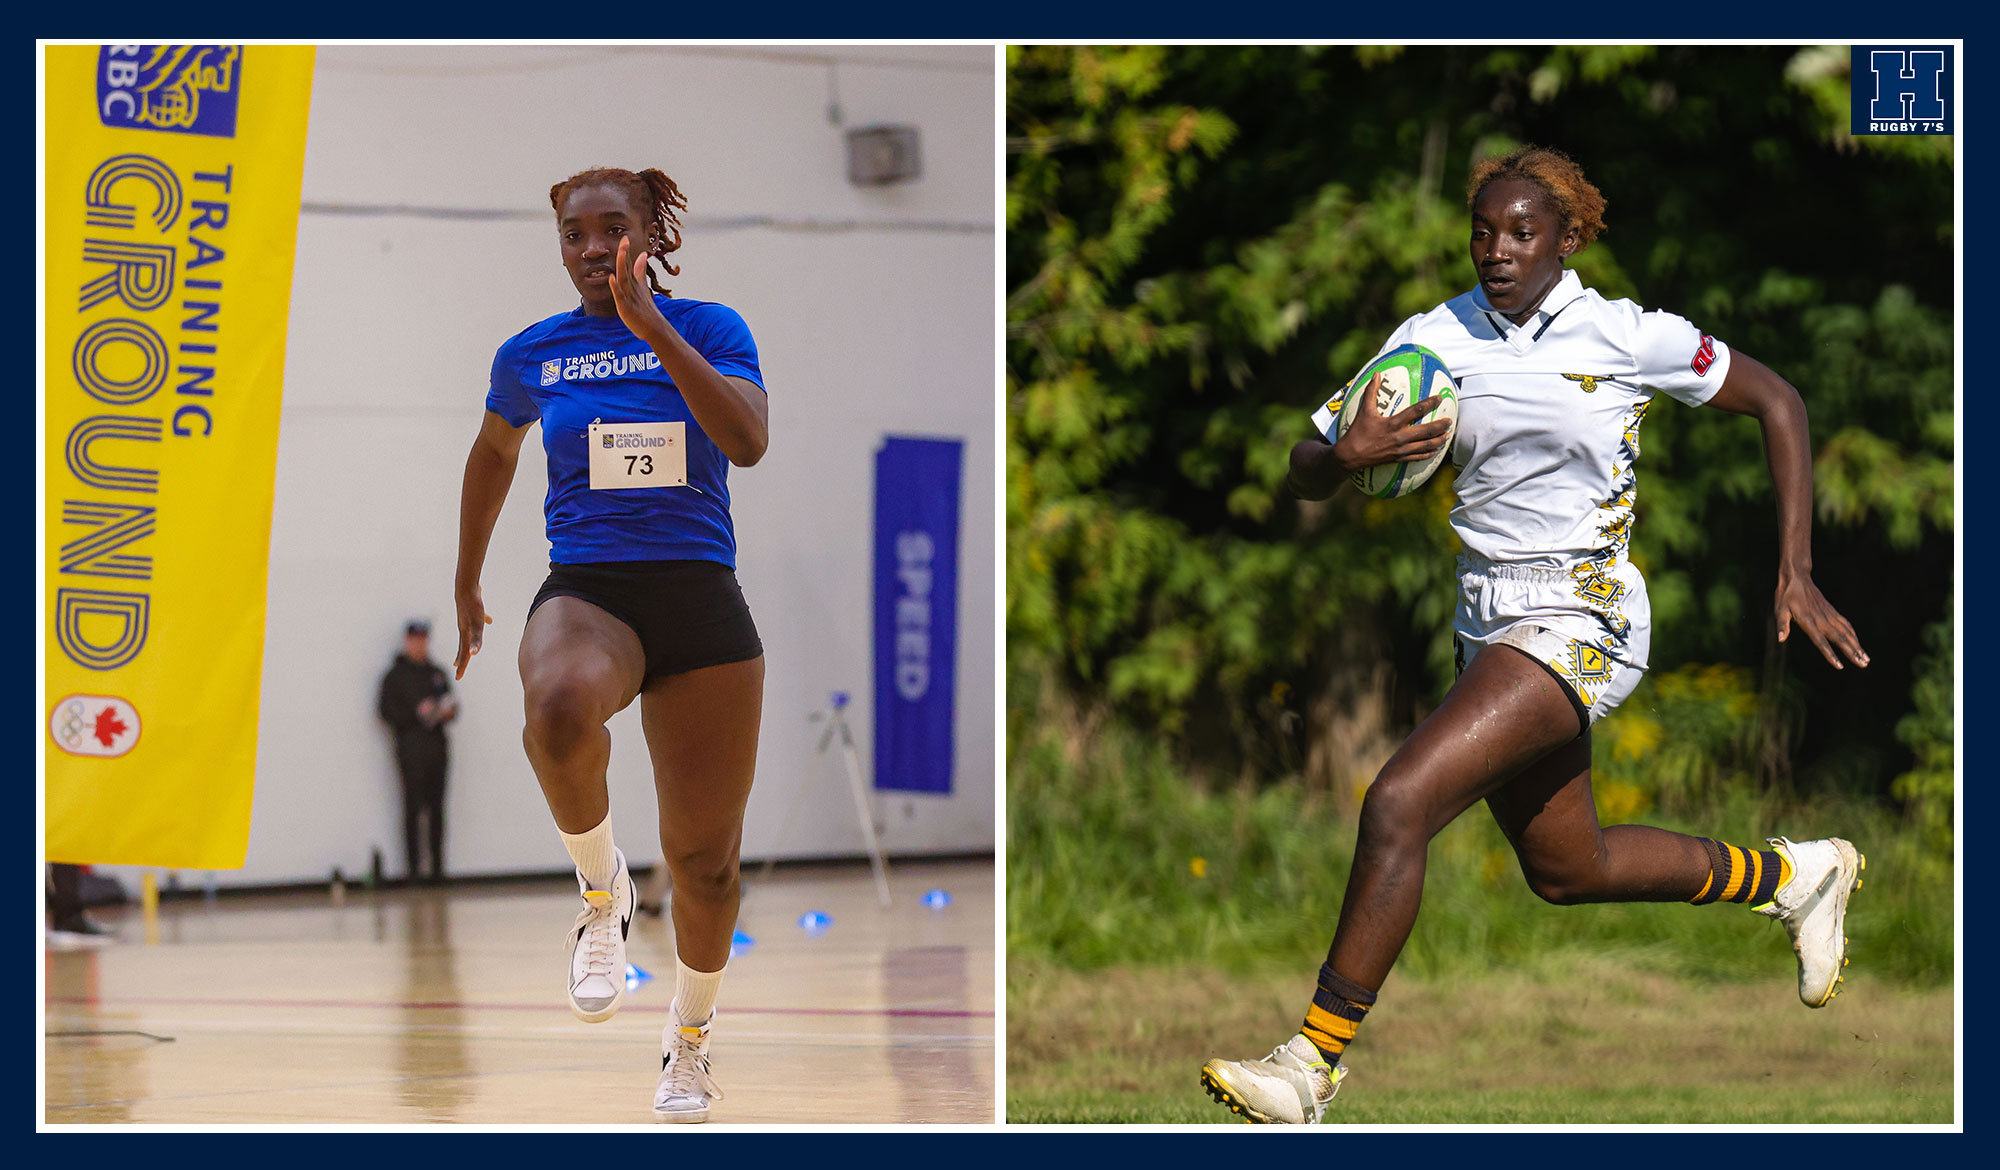 Mary competing at the RBC training ground while also playing Humber rugby sevens